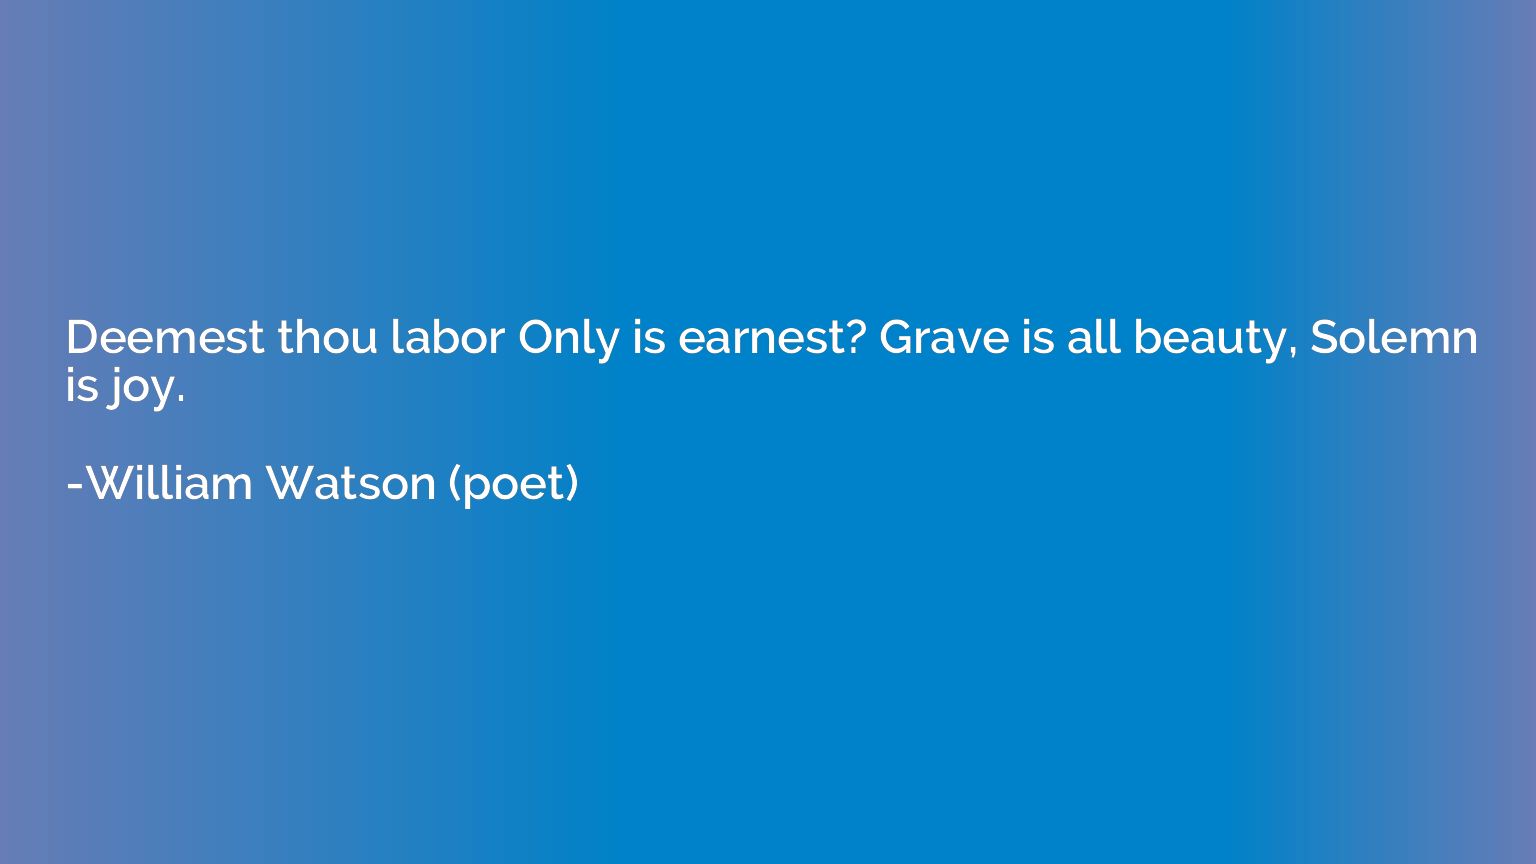 Deemest thou labor Only is earnest? Grave is all beauty, Sol